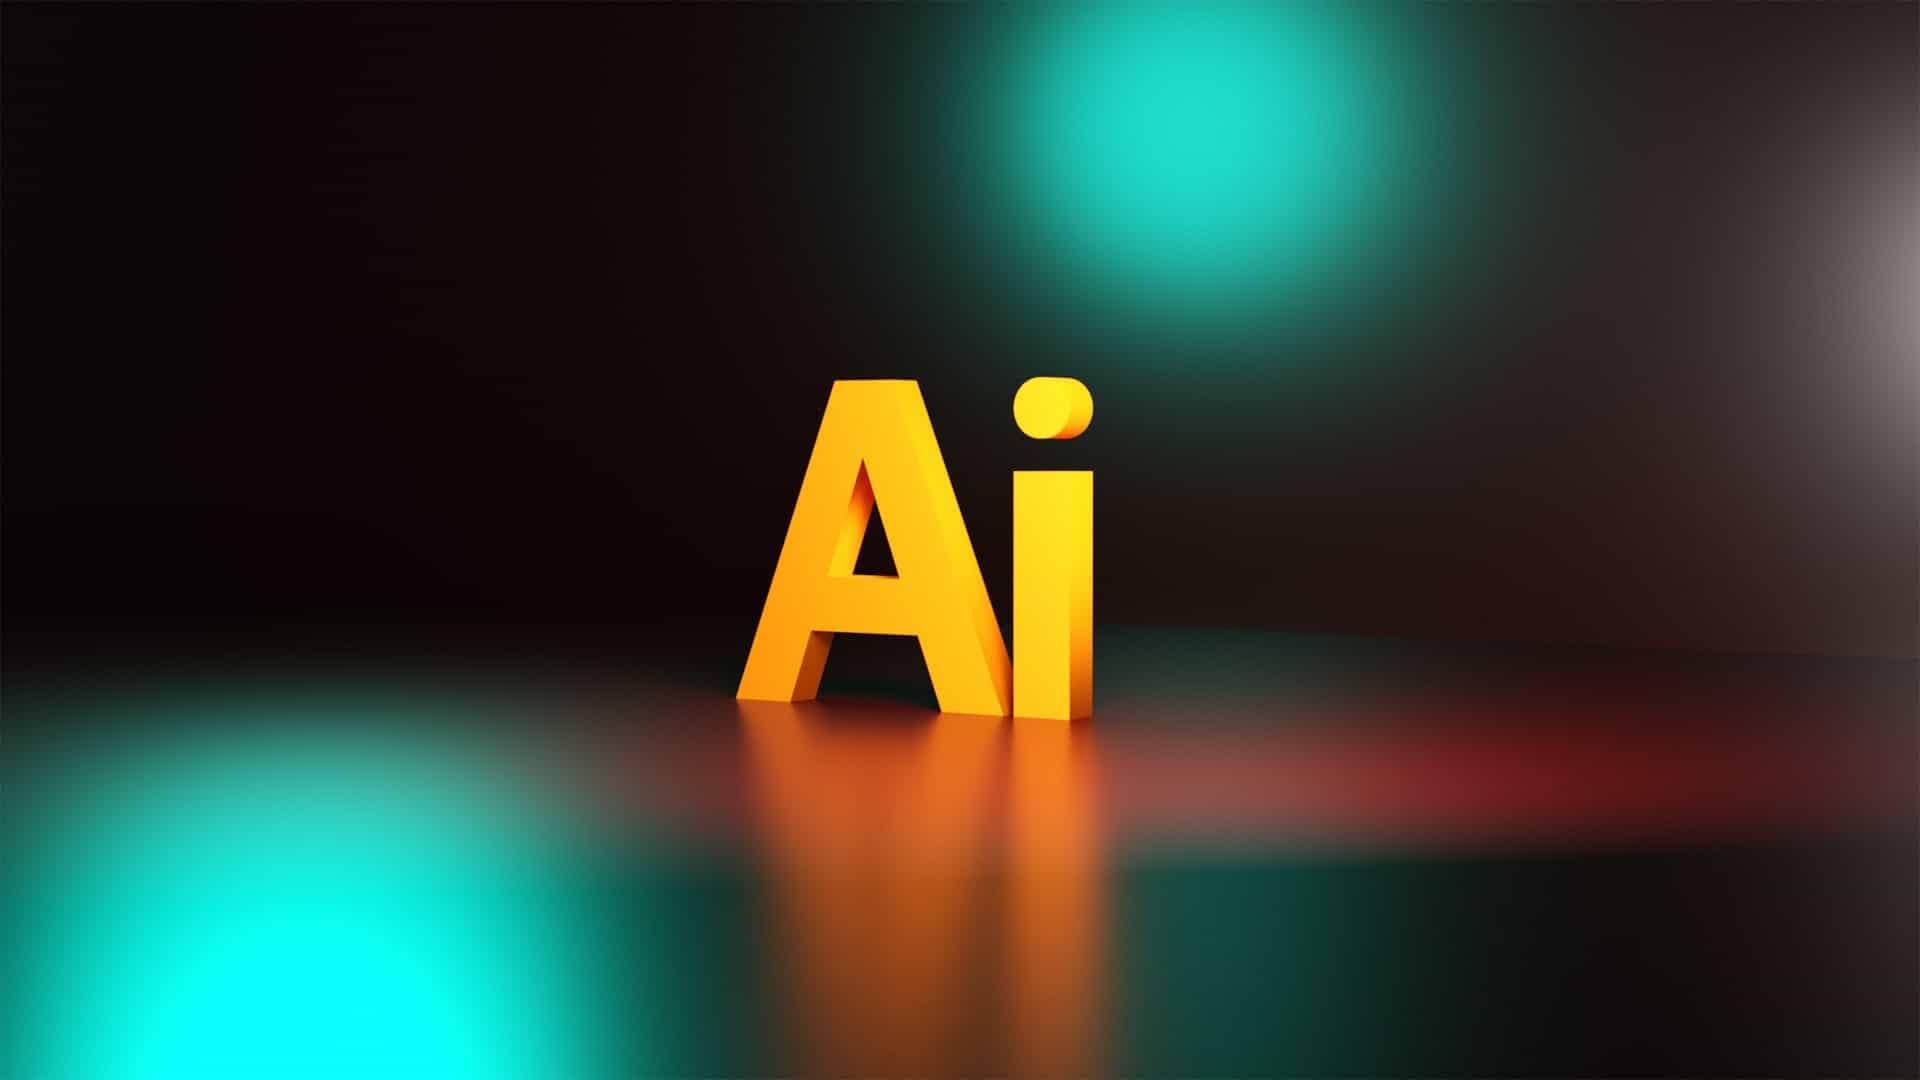 3d letters spelling out ai.jpg